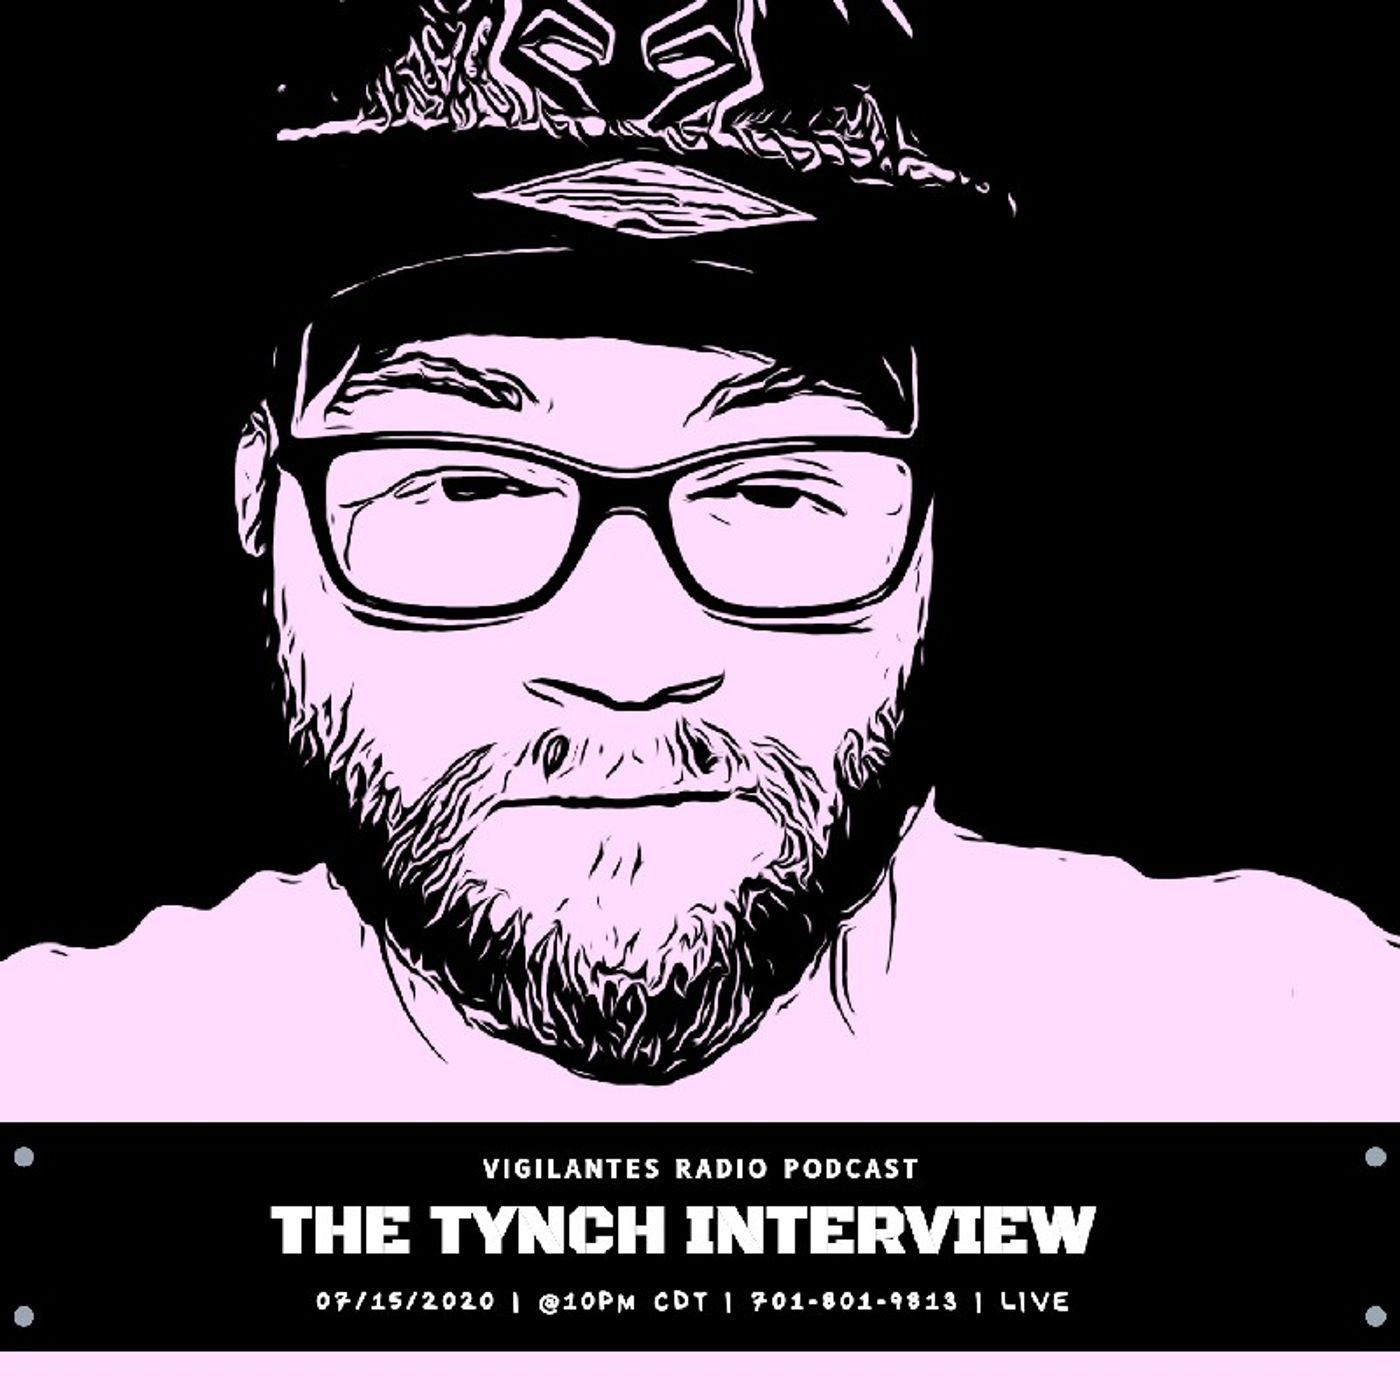 The Tynch Interview. Image